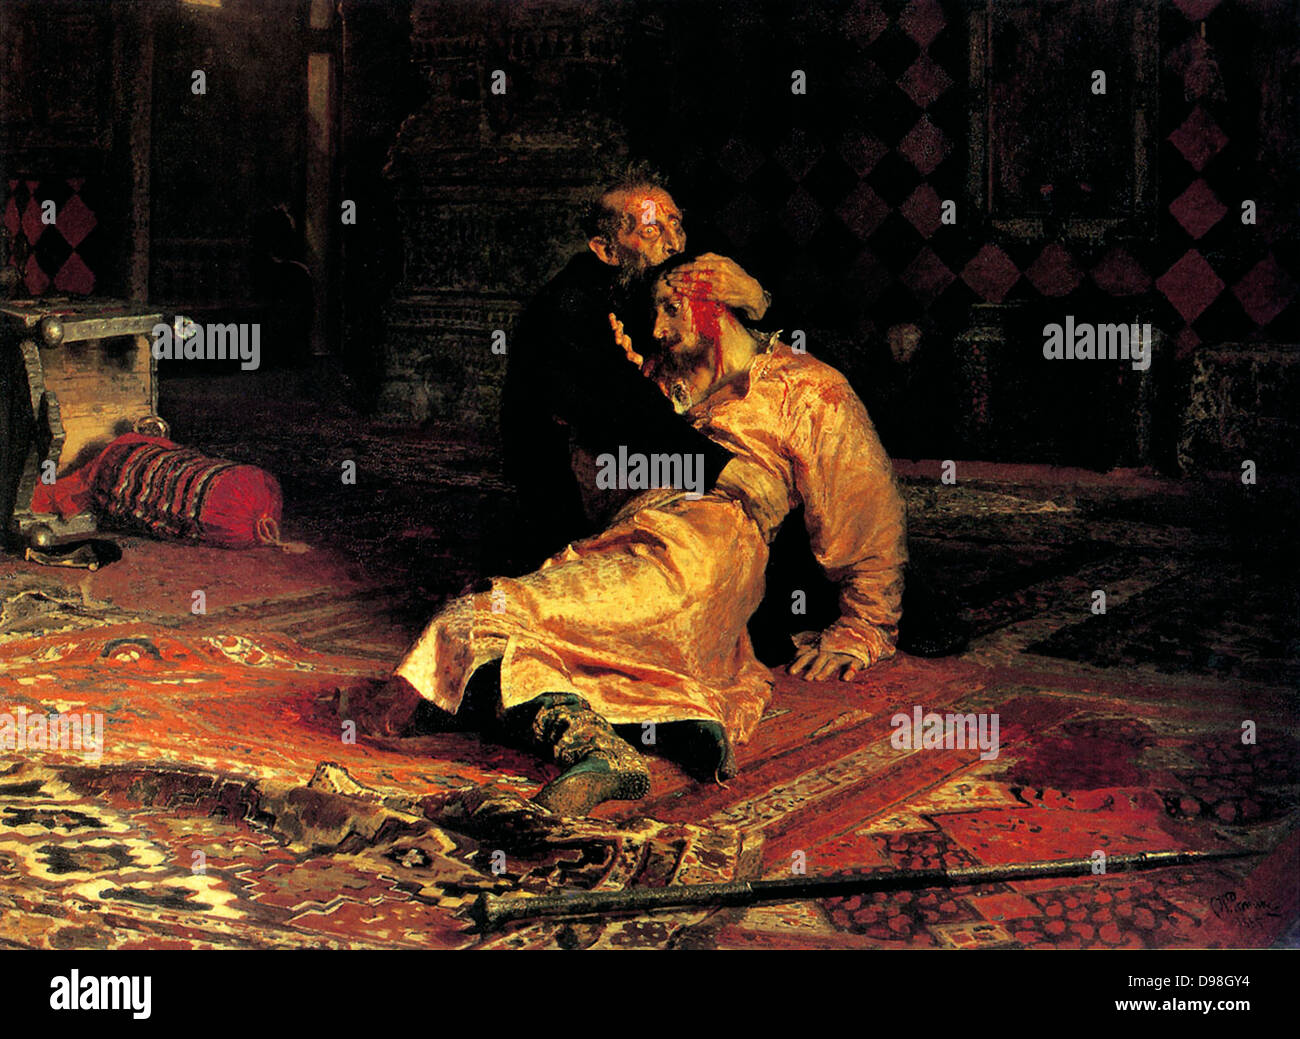 In 1581, Ivan beat his son, Ivan in a heated argument causing his son's death. Depicted in the painting by Ilya Repin, 'Ivan the Terrible killing his son' by Ilya Repin. Ivan IV 'the Terrible' (1530 – 1584) Tsar of Russia 1533 - 1584. Stock Photo